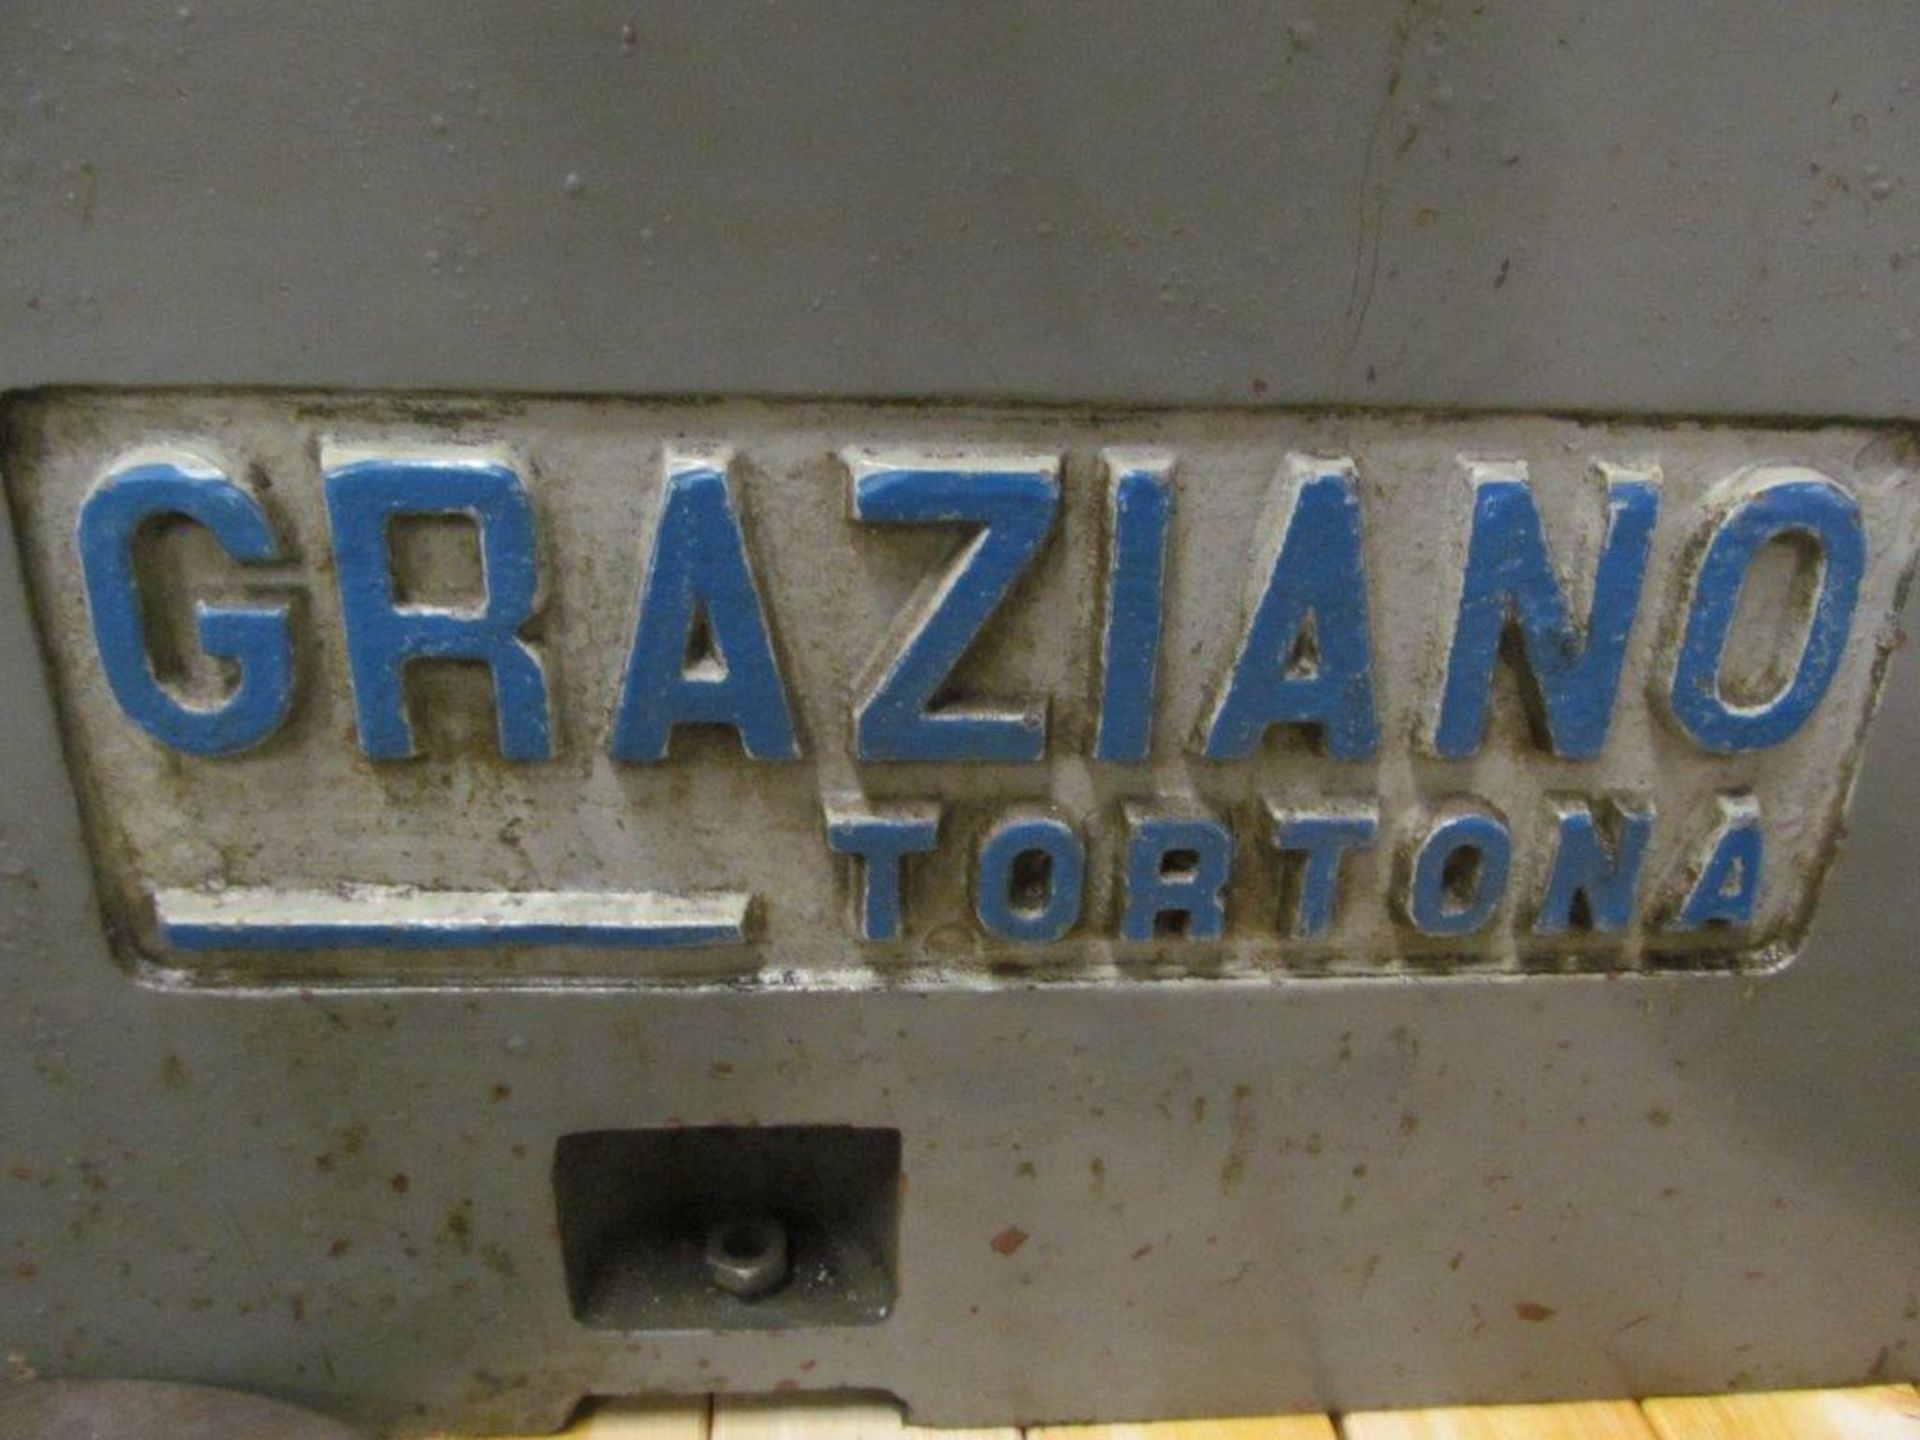 GRAZIANO ENGINE LATHE MODEL SAG 12, 14-1/2" SWING X 30" CENTERS, C/W ACCOMPANYING ACCESSORIES, - Image 7 of 8